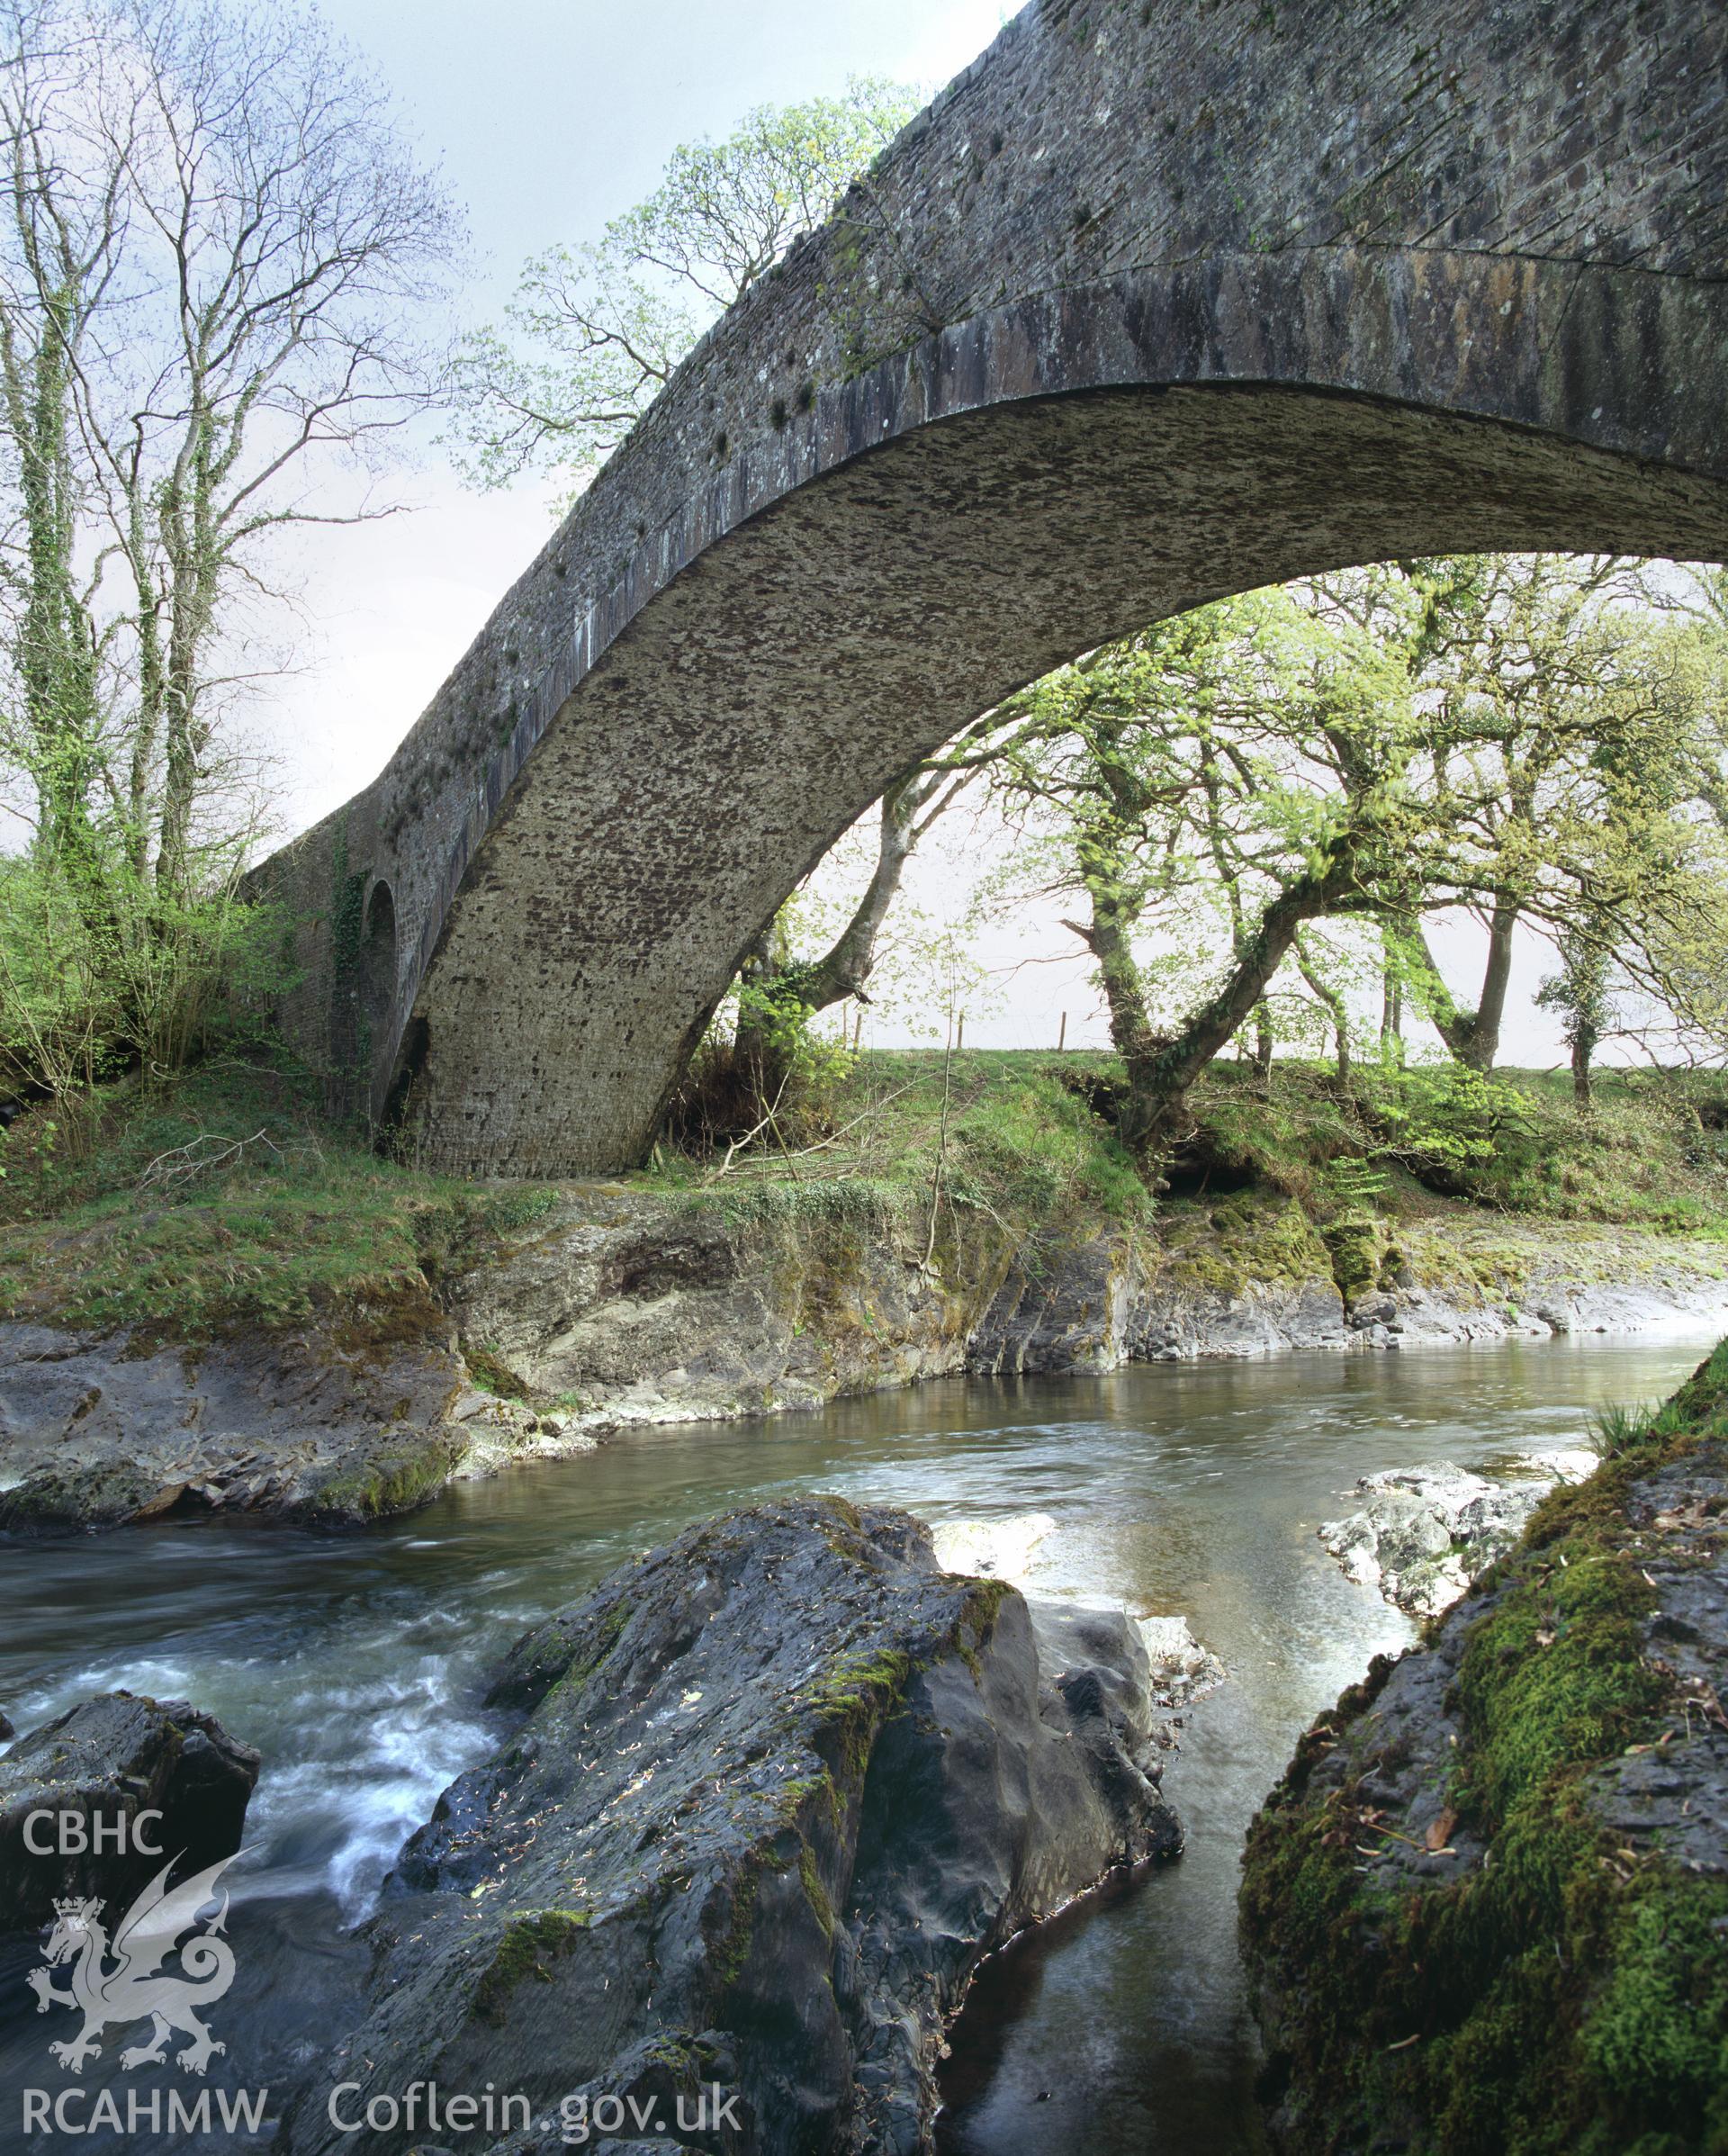 Colour transparency showing a view of Pont Dolauhirion, Llandovery, produced by Iain Wright, June 2004